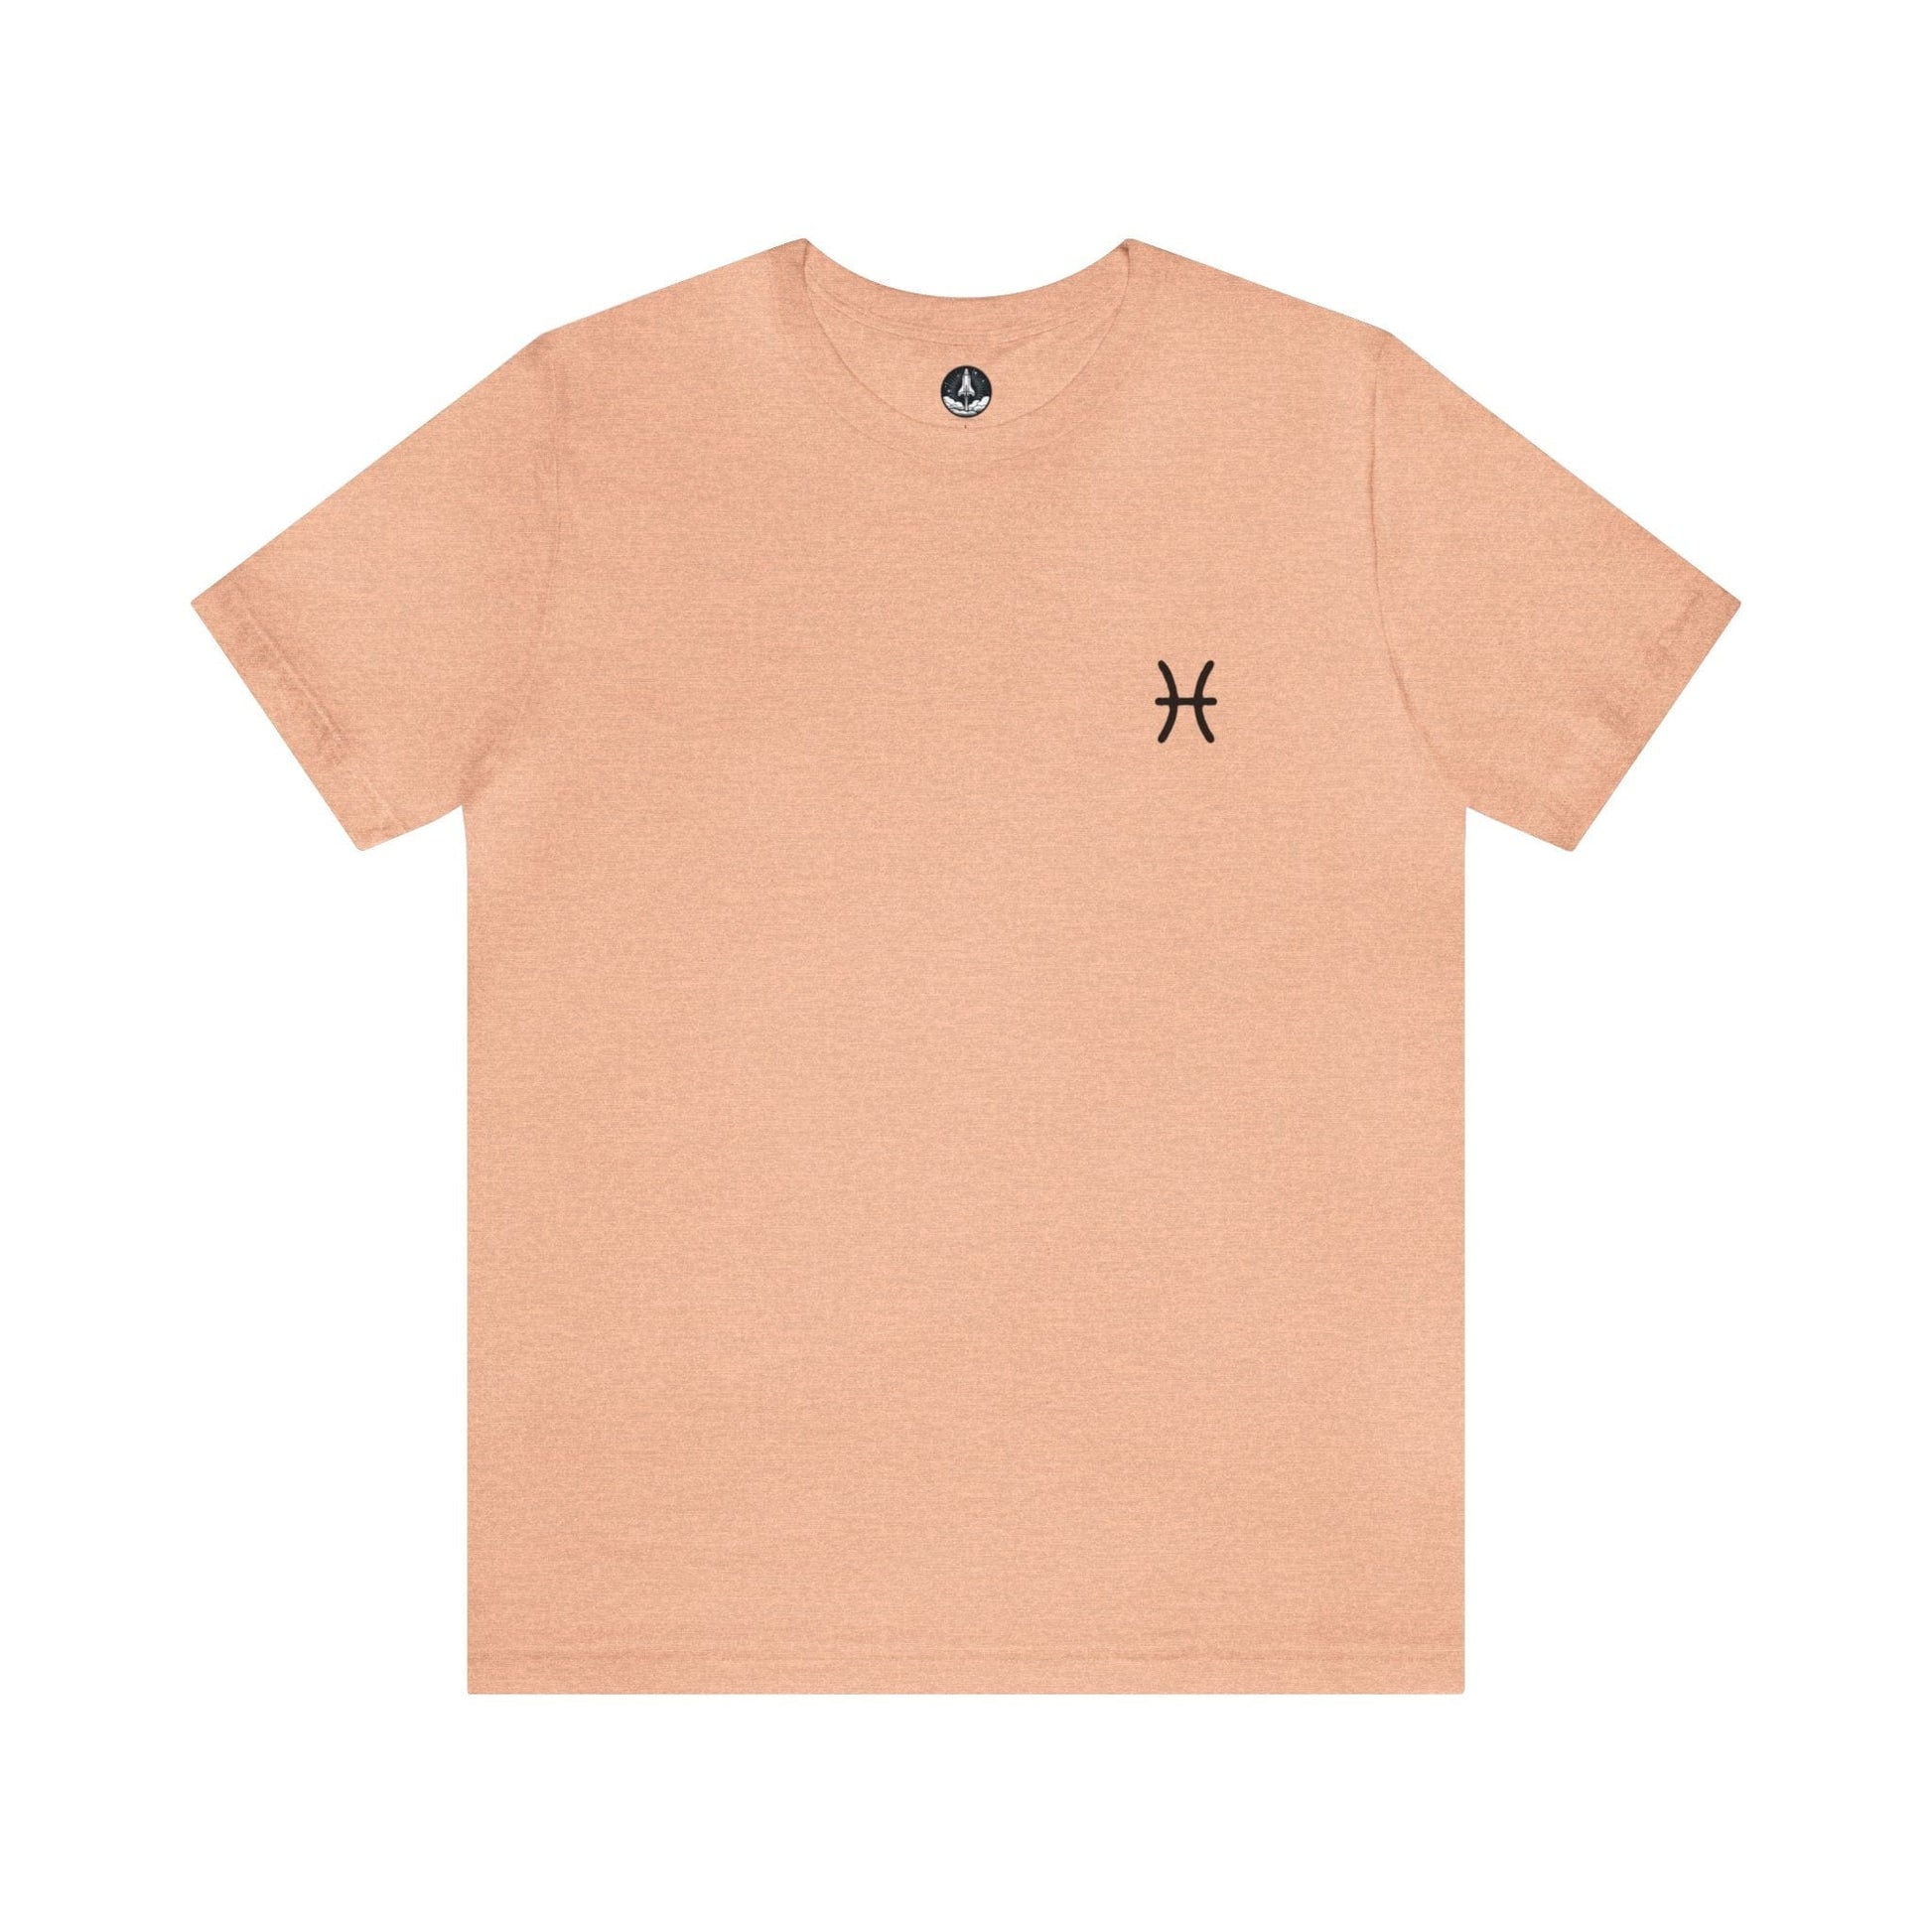 T-Shirt Heather Peach / S Pisces Fish Silhouette T-Shirt: Dreamy Comfort for the Compassionate Soul